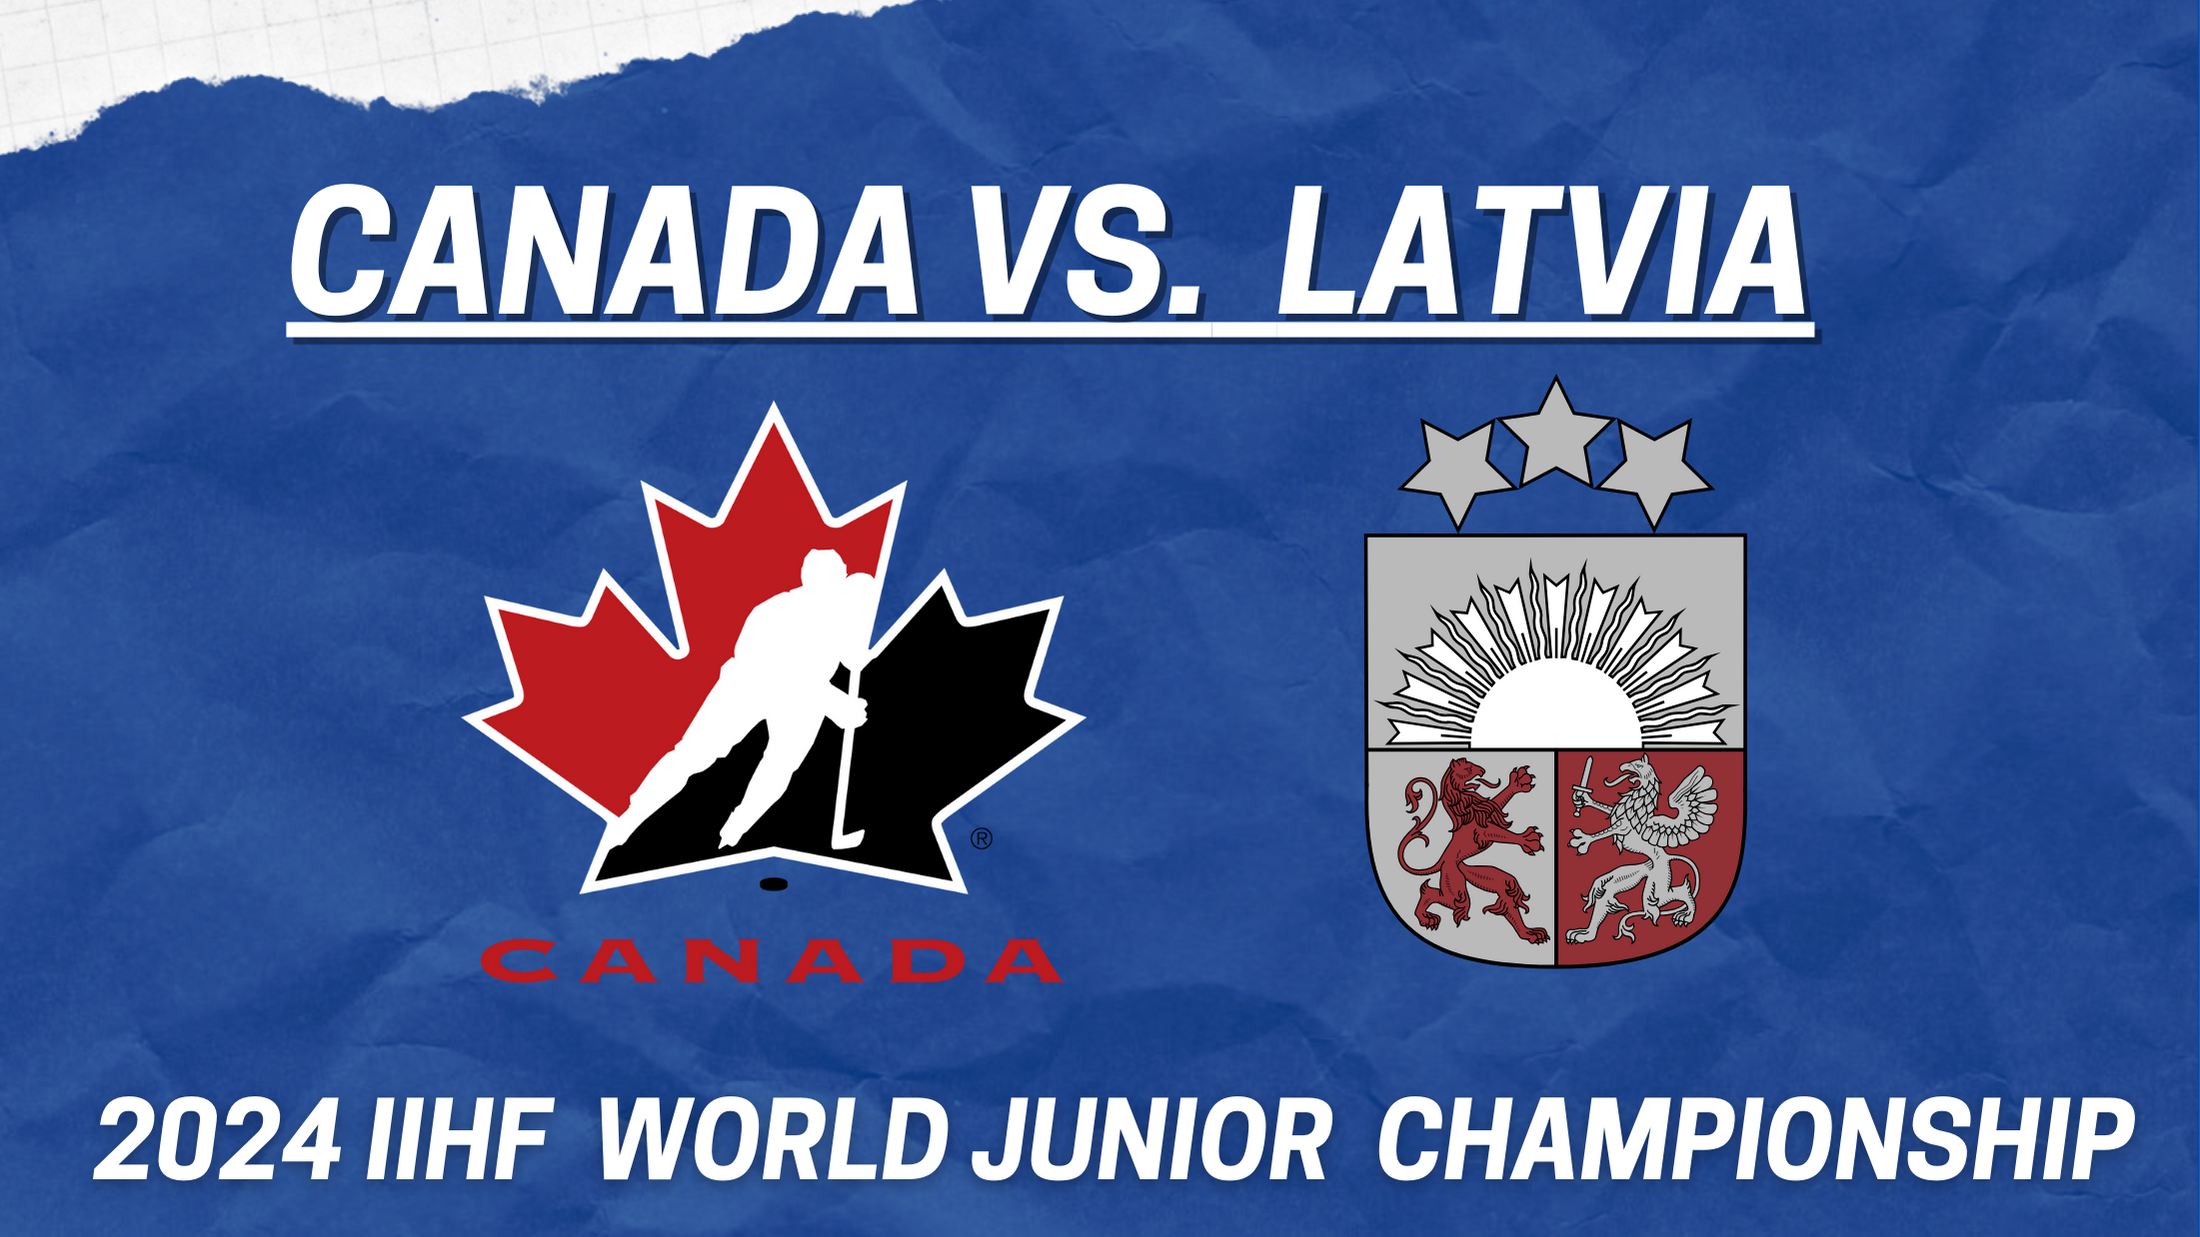 Top standouts from Canada vs. Latvia at 2024 World Junior Championship